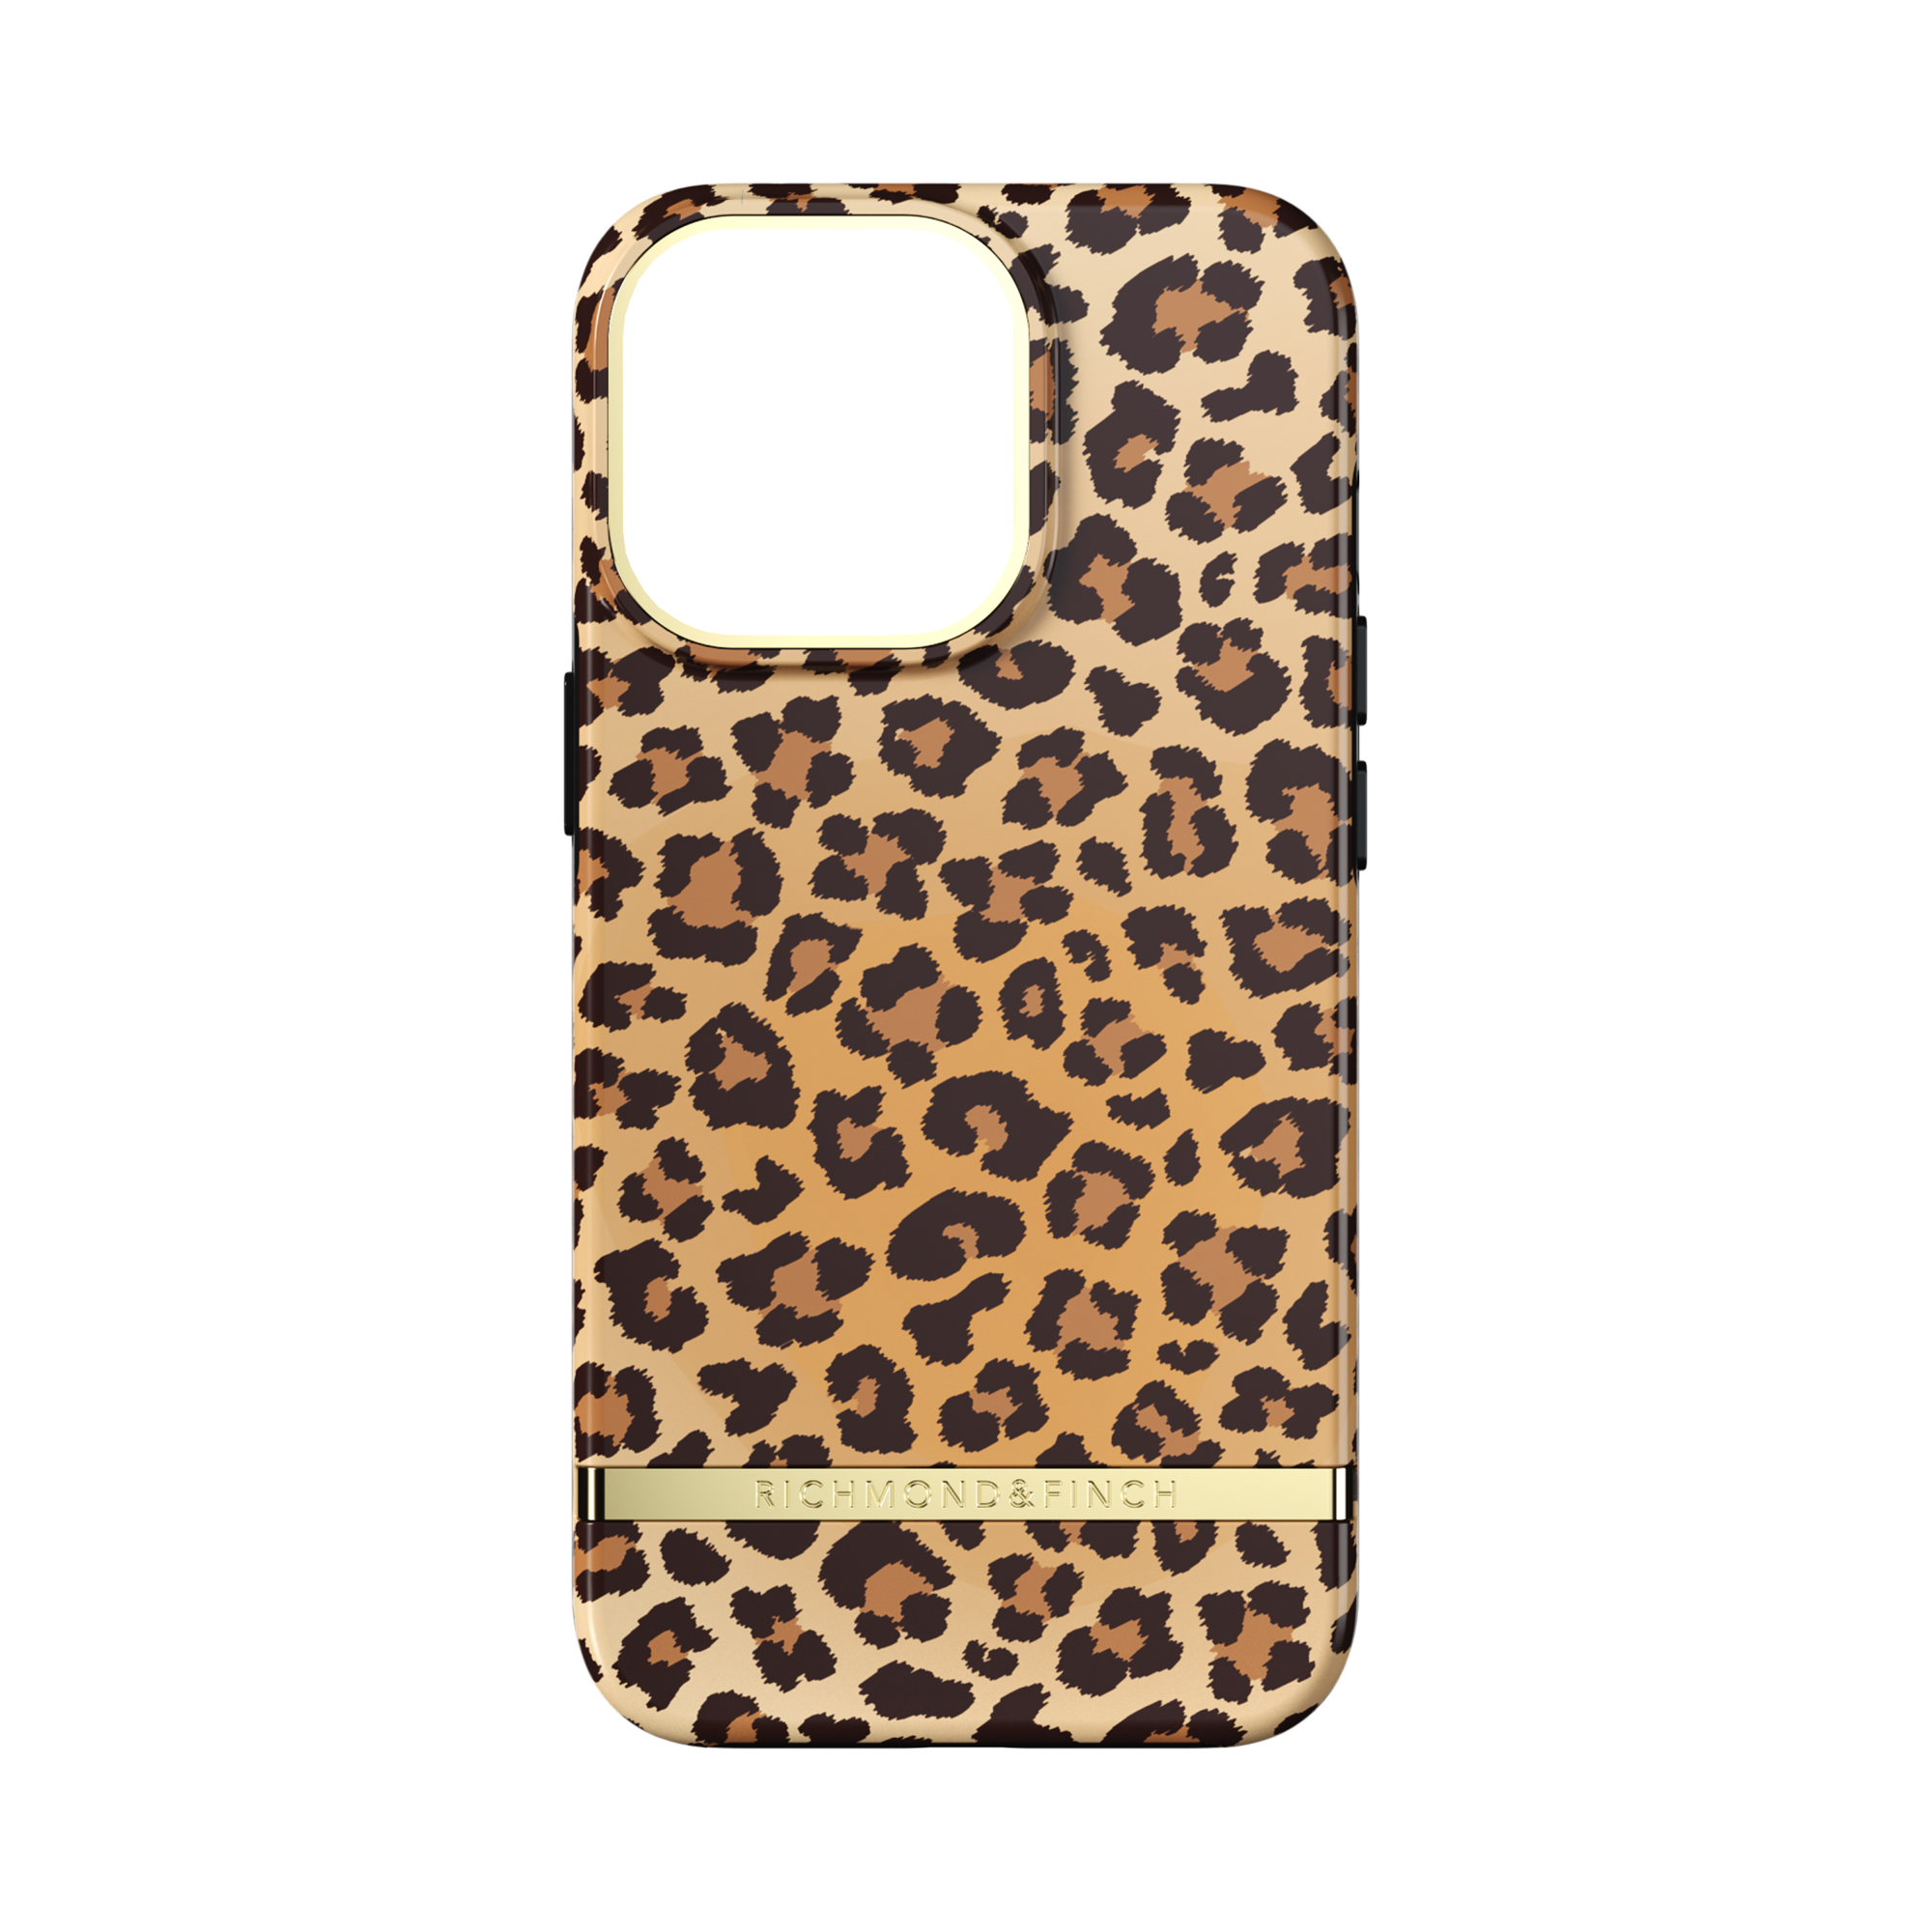 FINCH IPHONE 13 Backcover, RICHMOND & Soft Leopard 13 YELLOW PRO, Pro, iPhone APPLE,